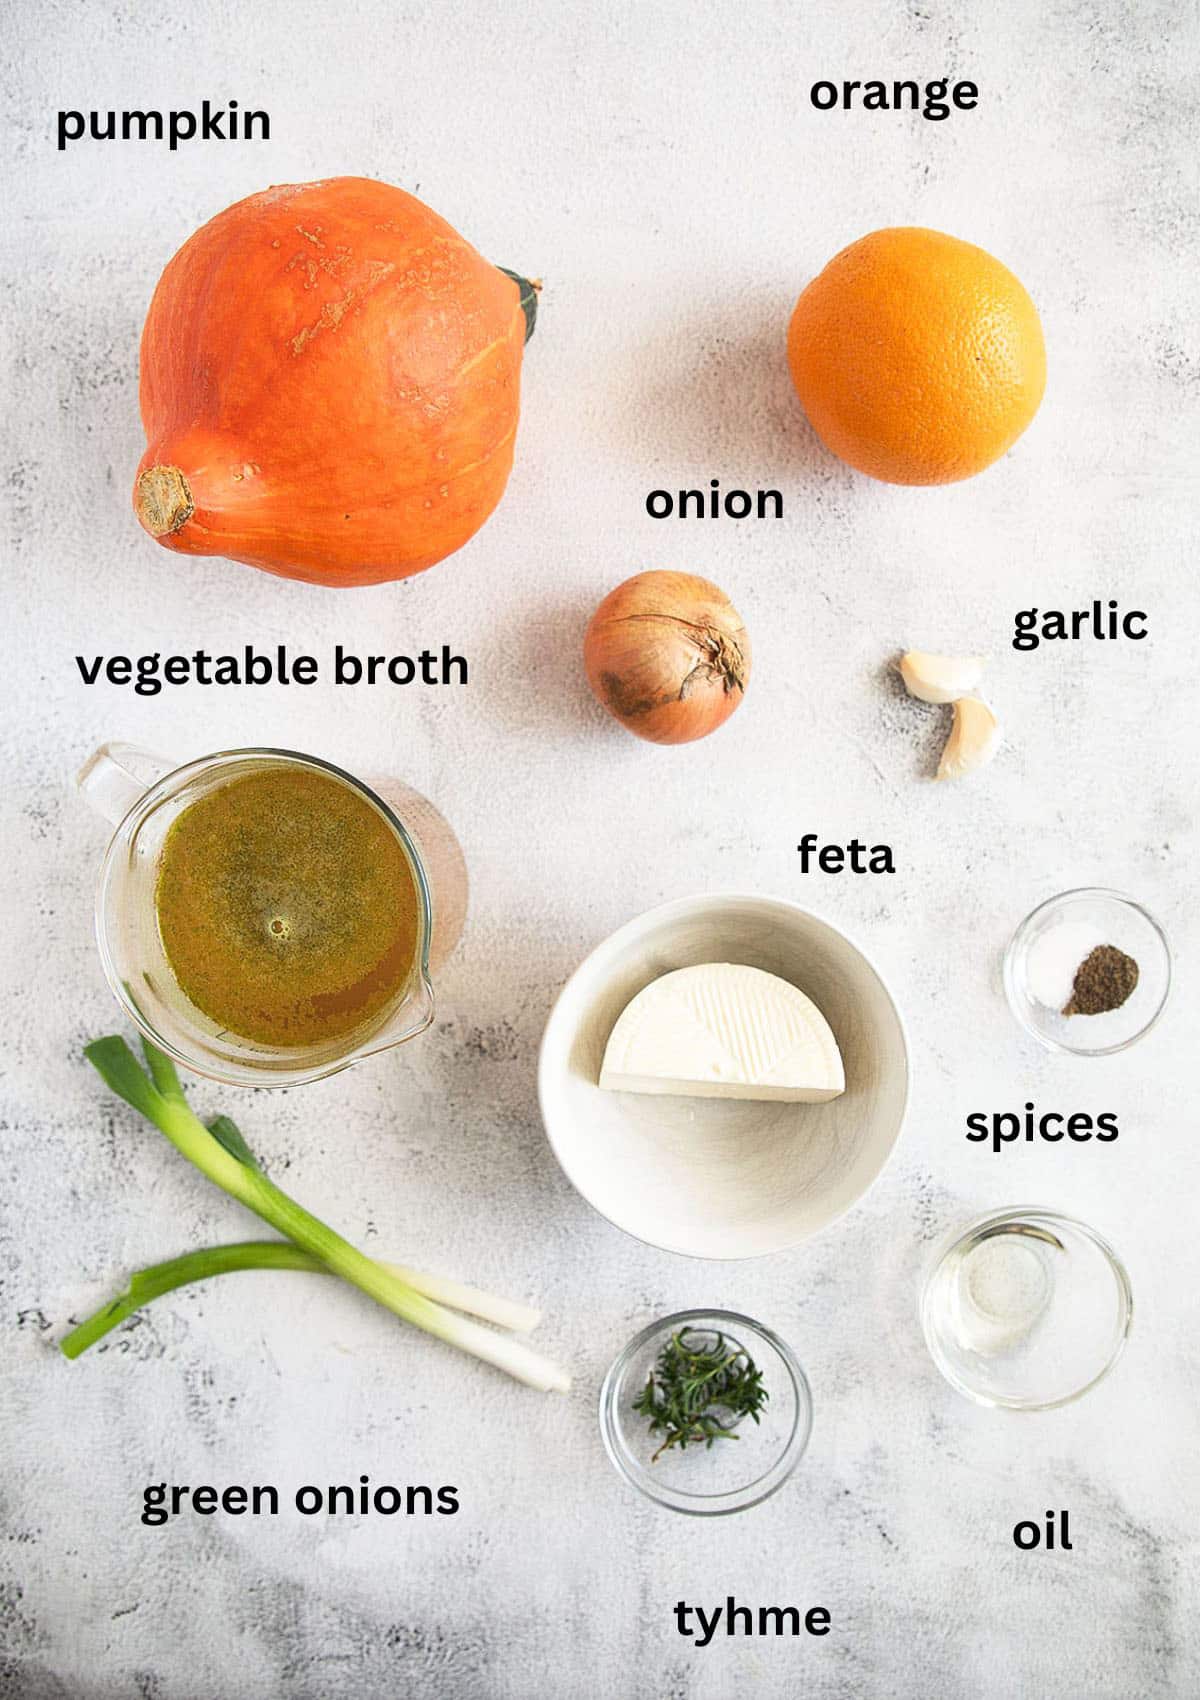 listed ingredients for making soup with pumpkin, orange, feta and green onion topping.